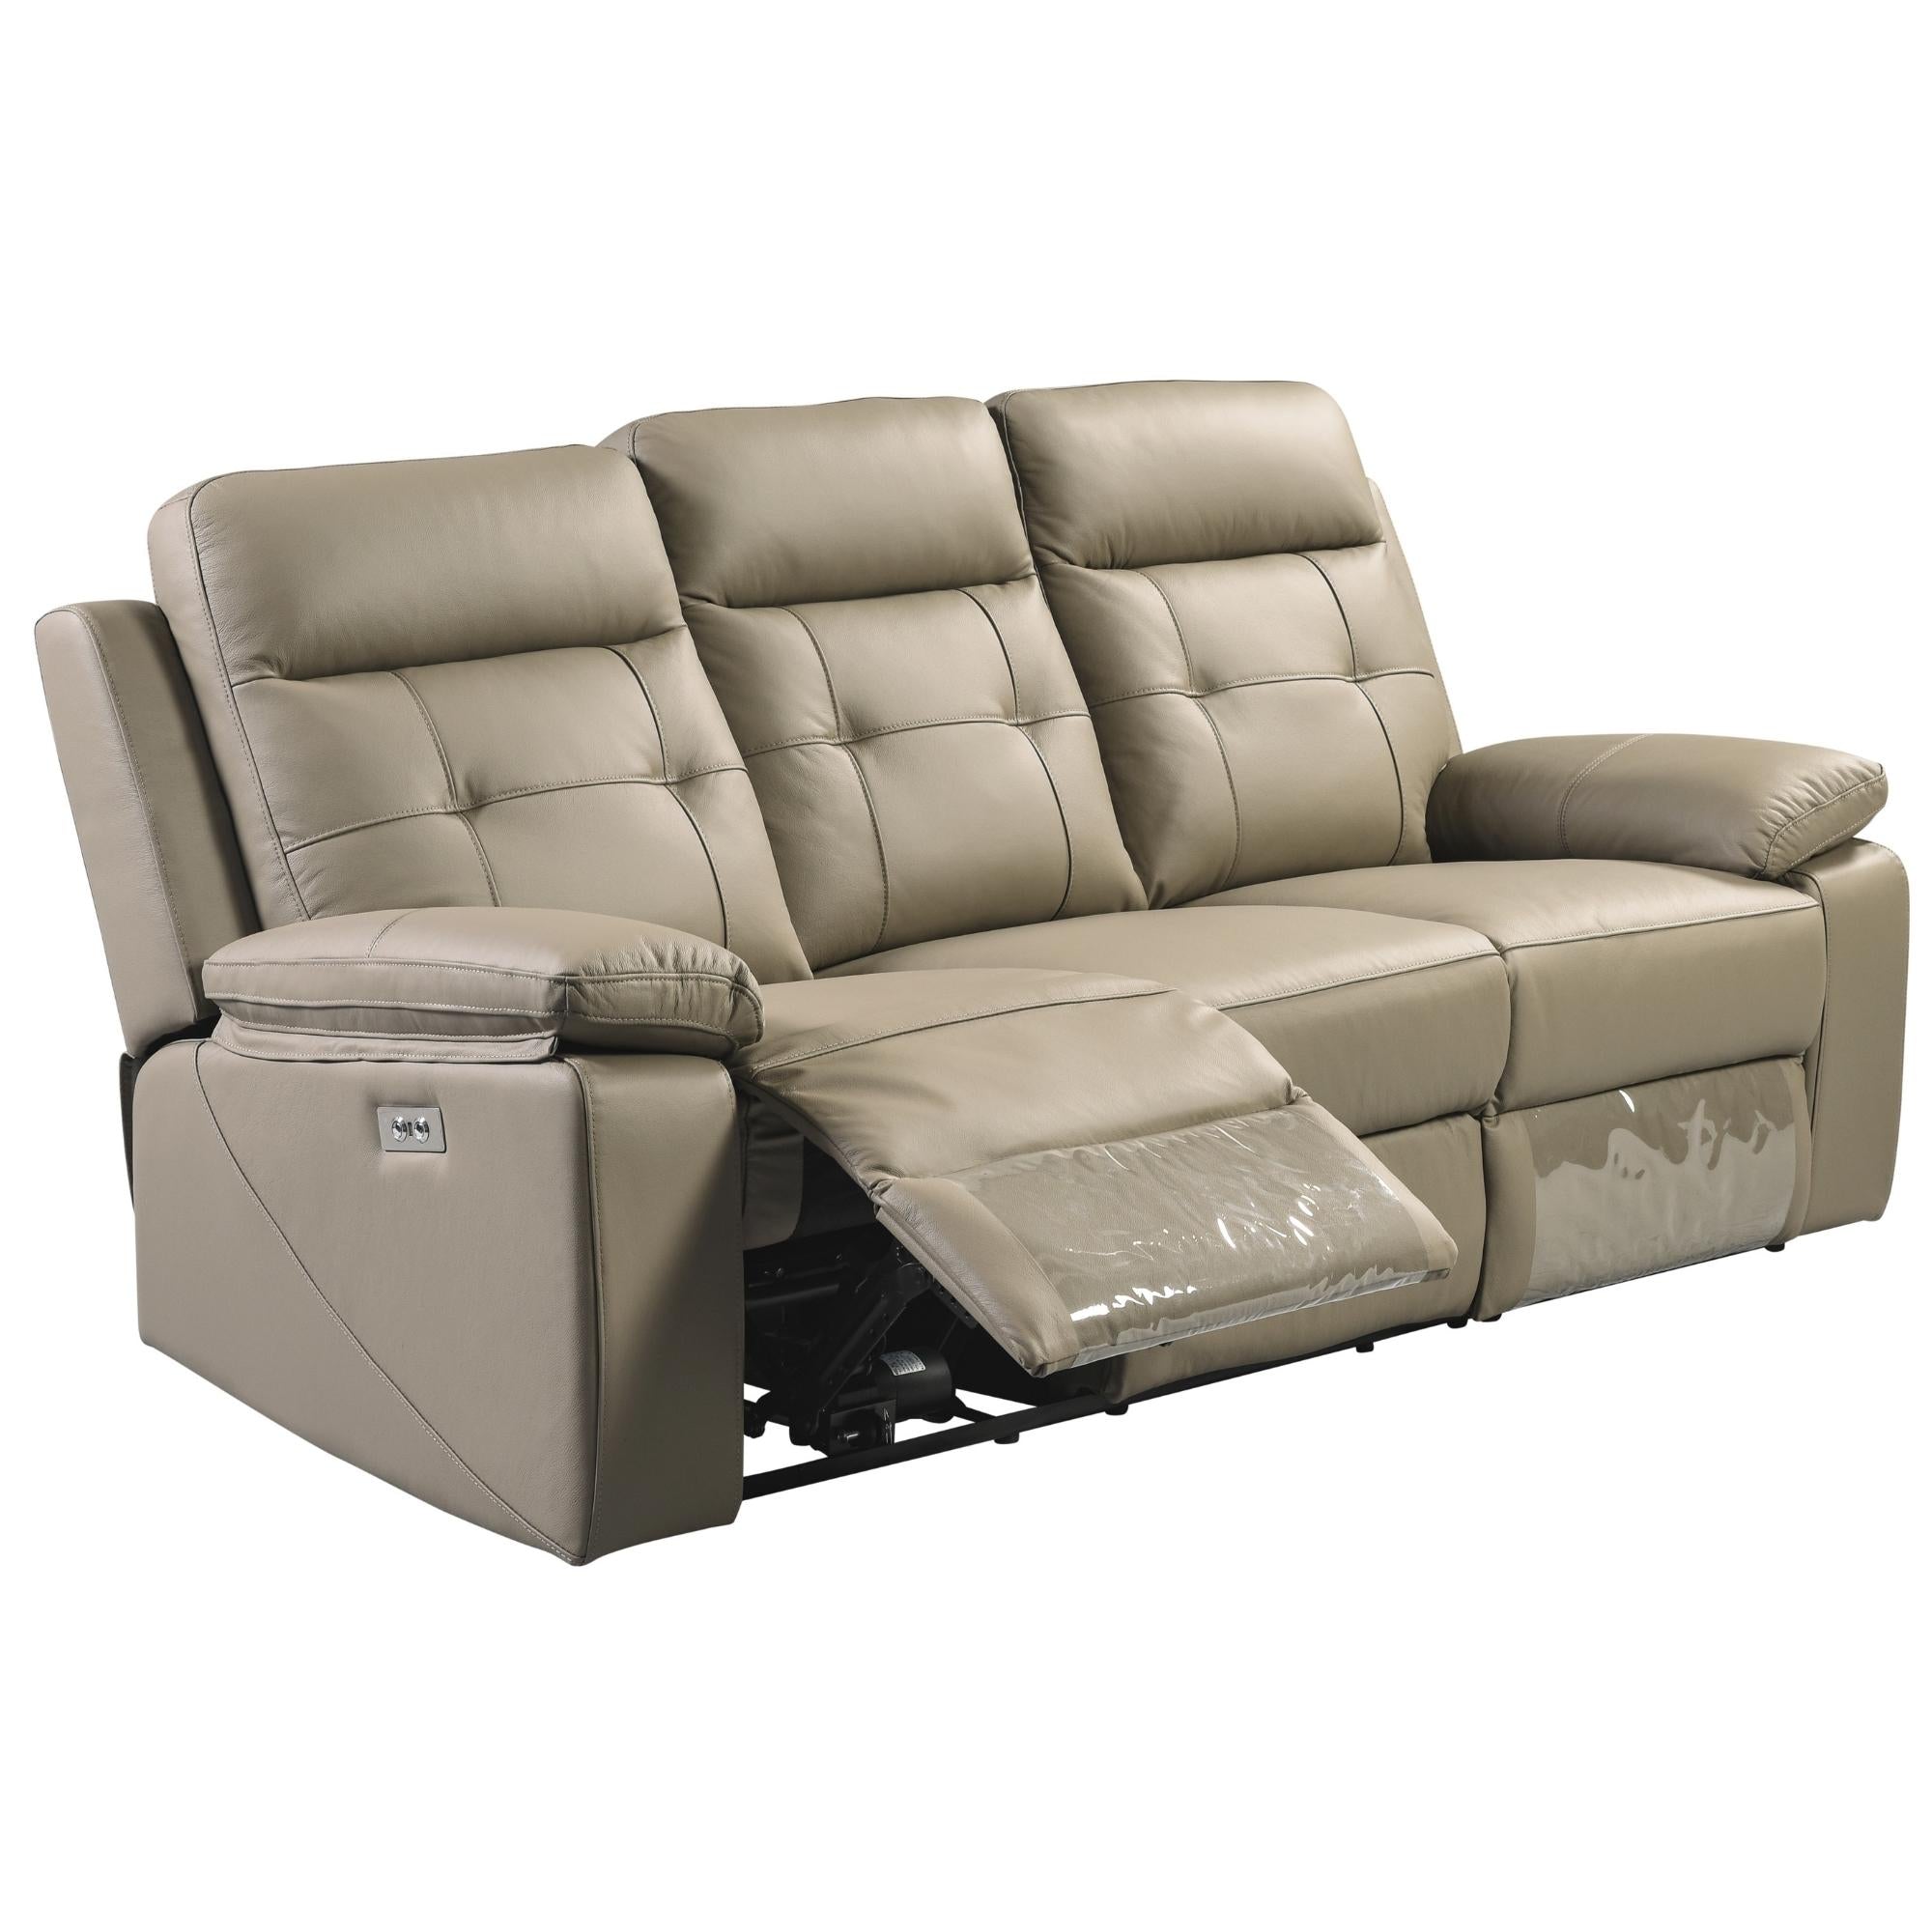 3 + 2 Seater Electric Recliner Sofa Genuine Leather Home Theater Lounge